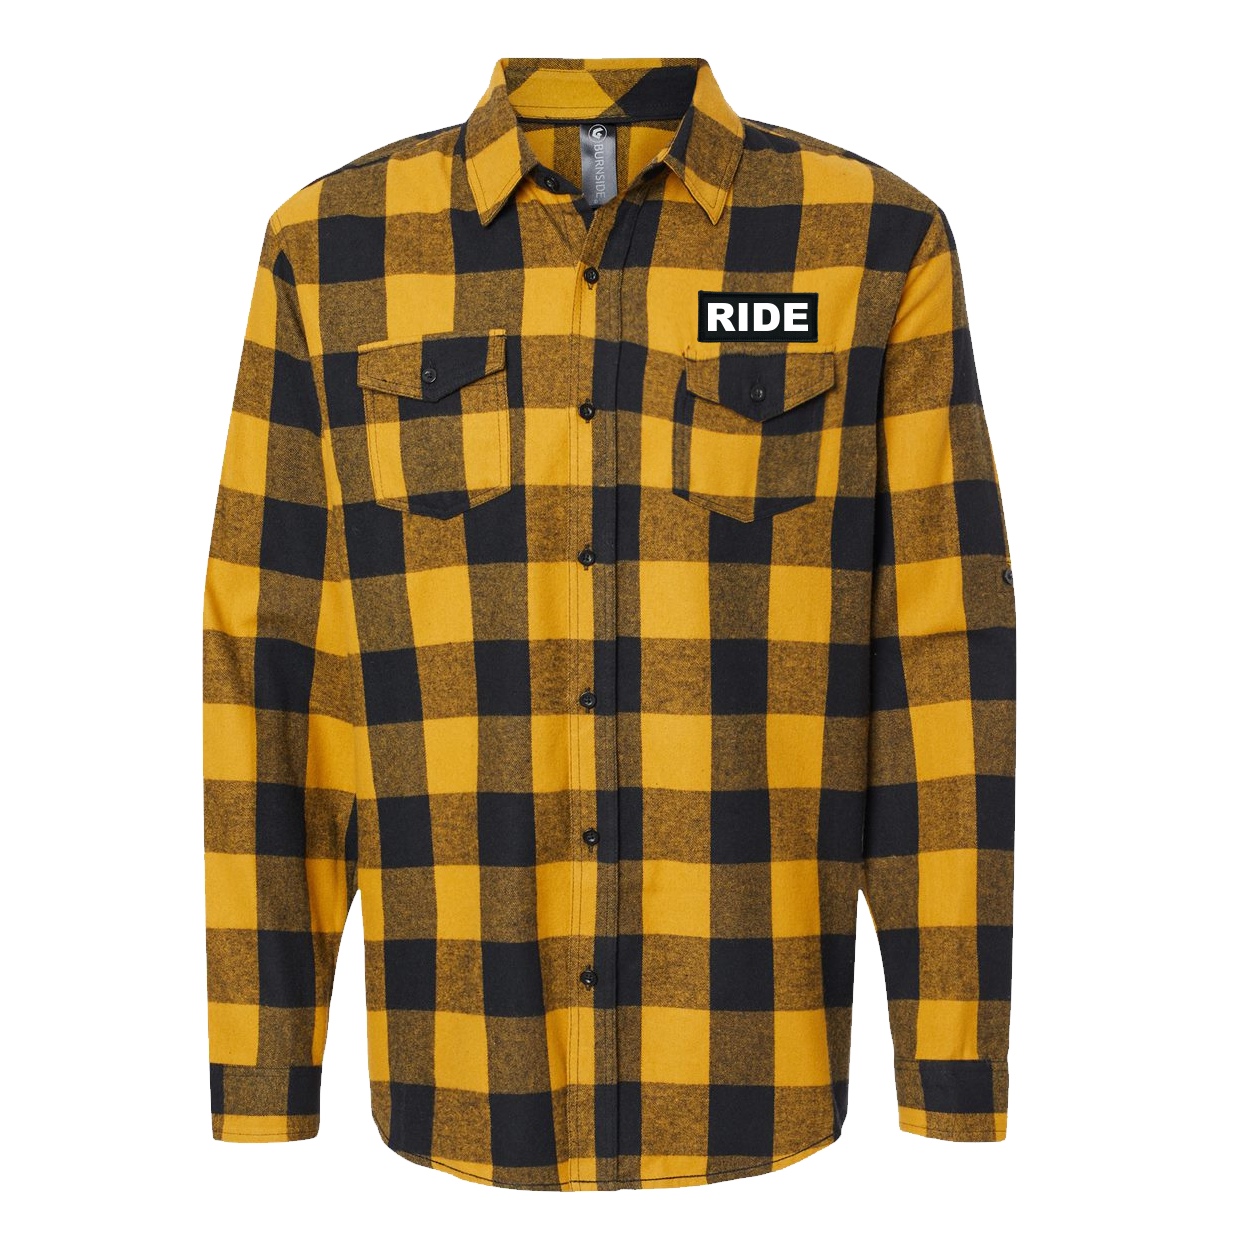 Ride Brand Logo Classic Unisex Woven Patch Quilted Button Flannel Jacket Black/Gold Buffalo